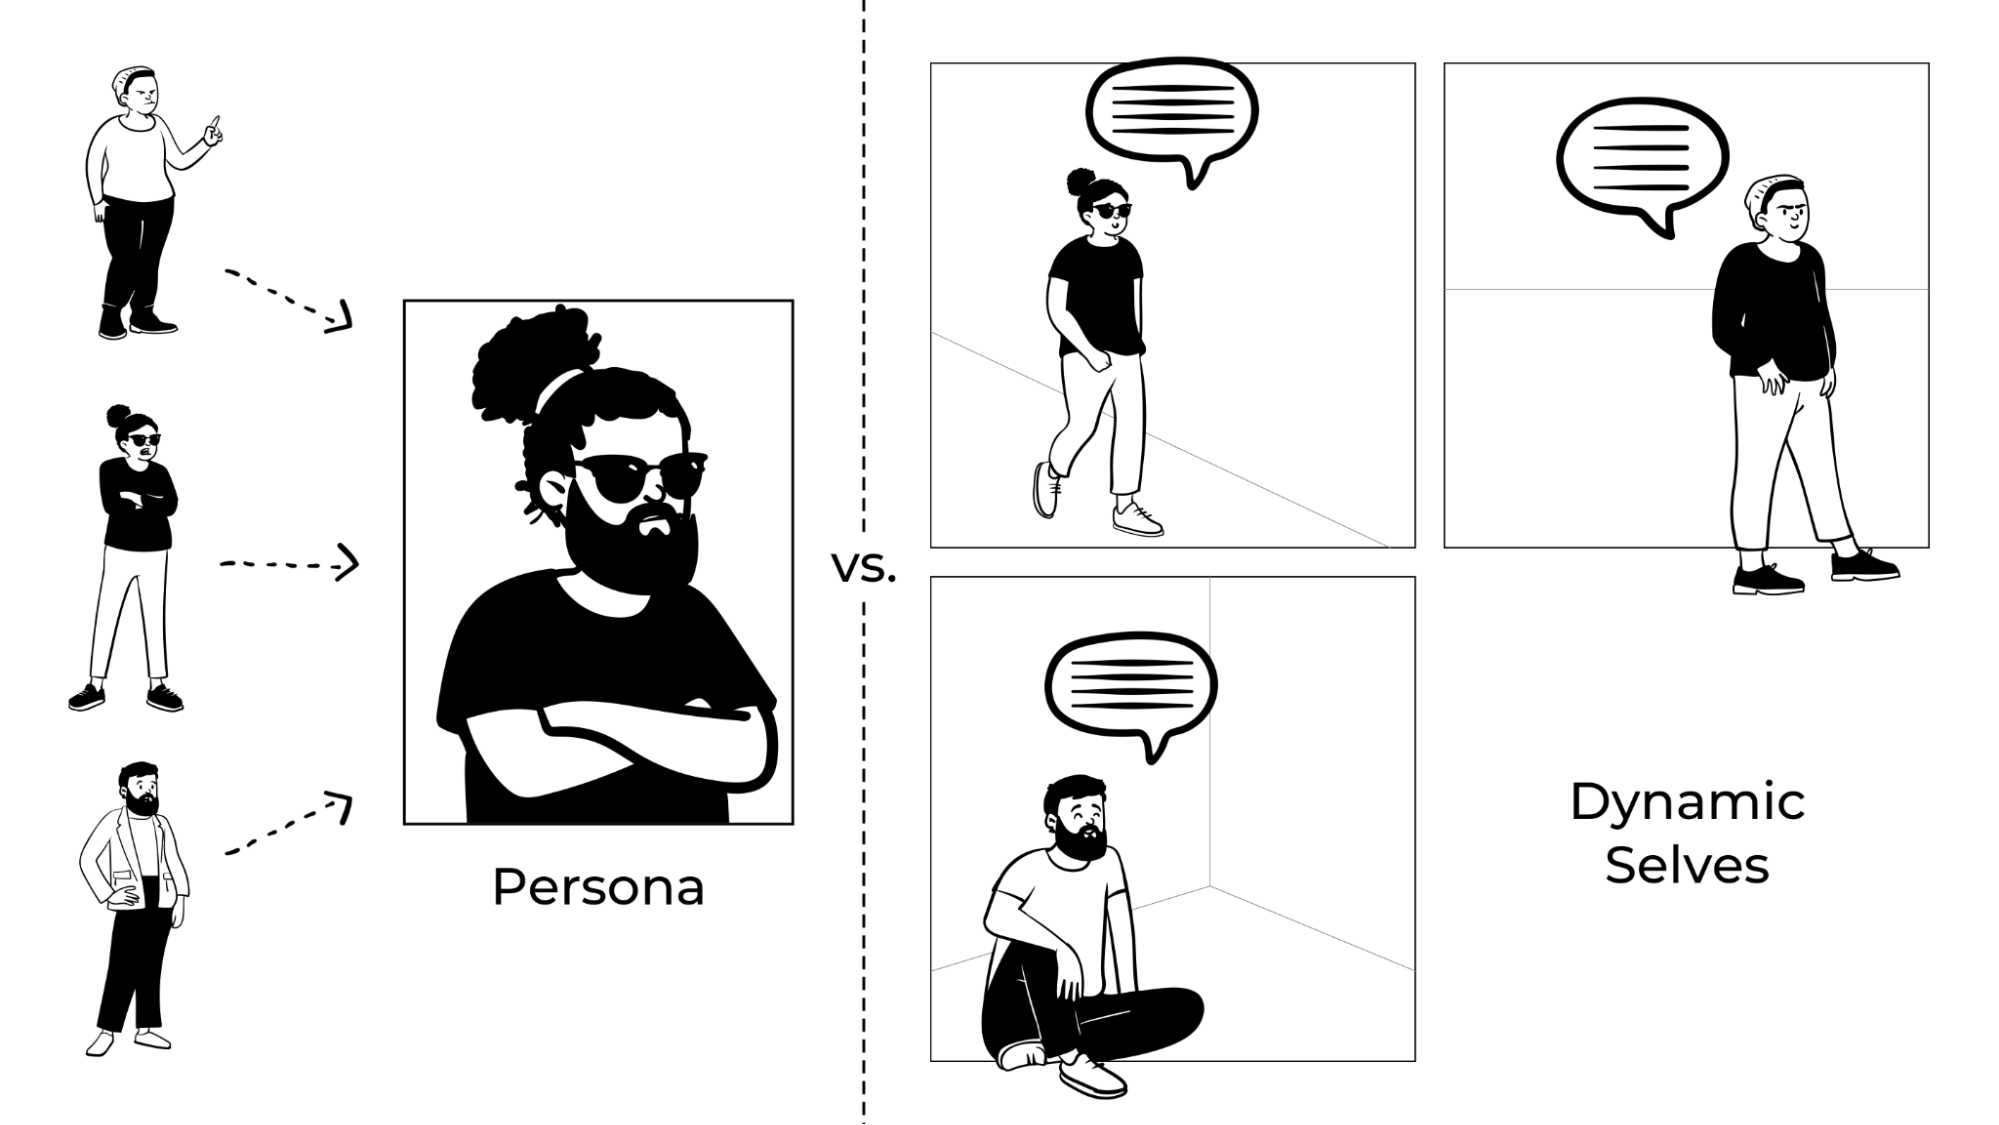 A comparison. On one side, three people are fused into one to create a persona; in the second, the three people exist as separate dynamic selves.